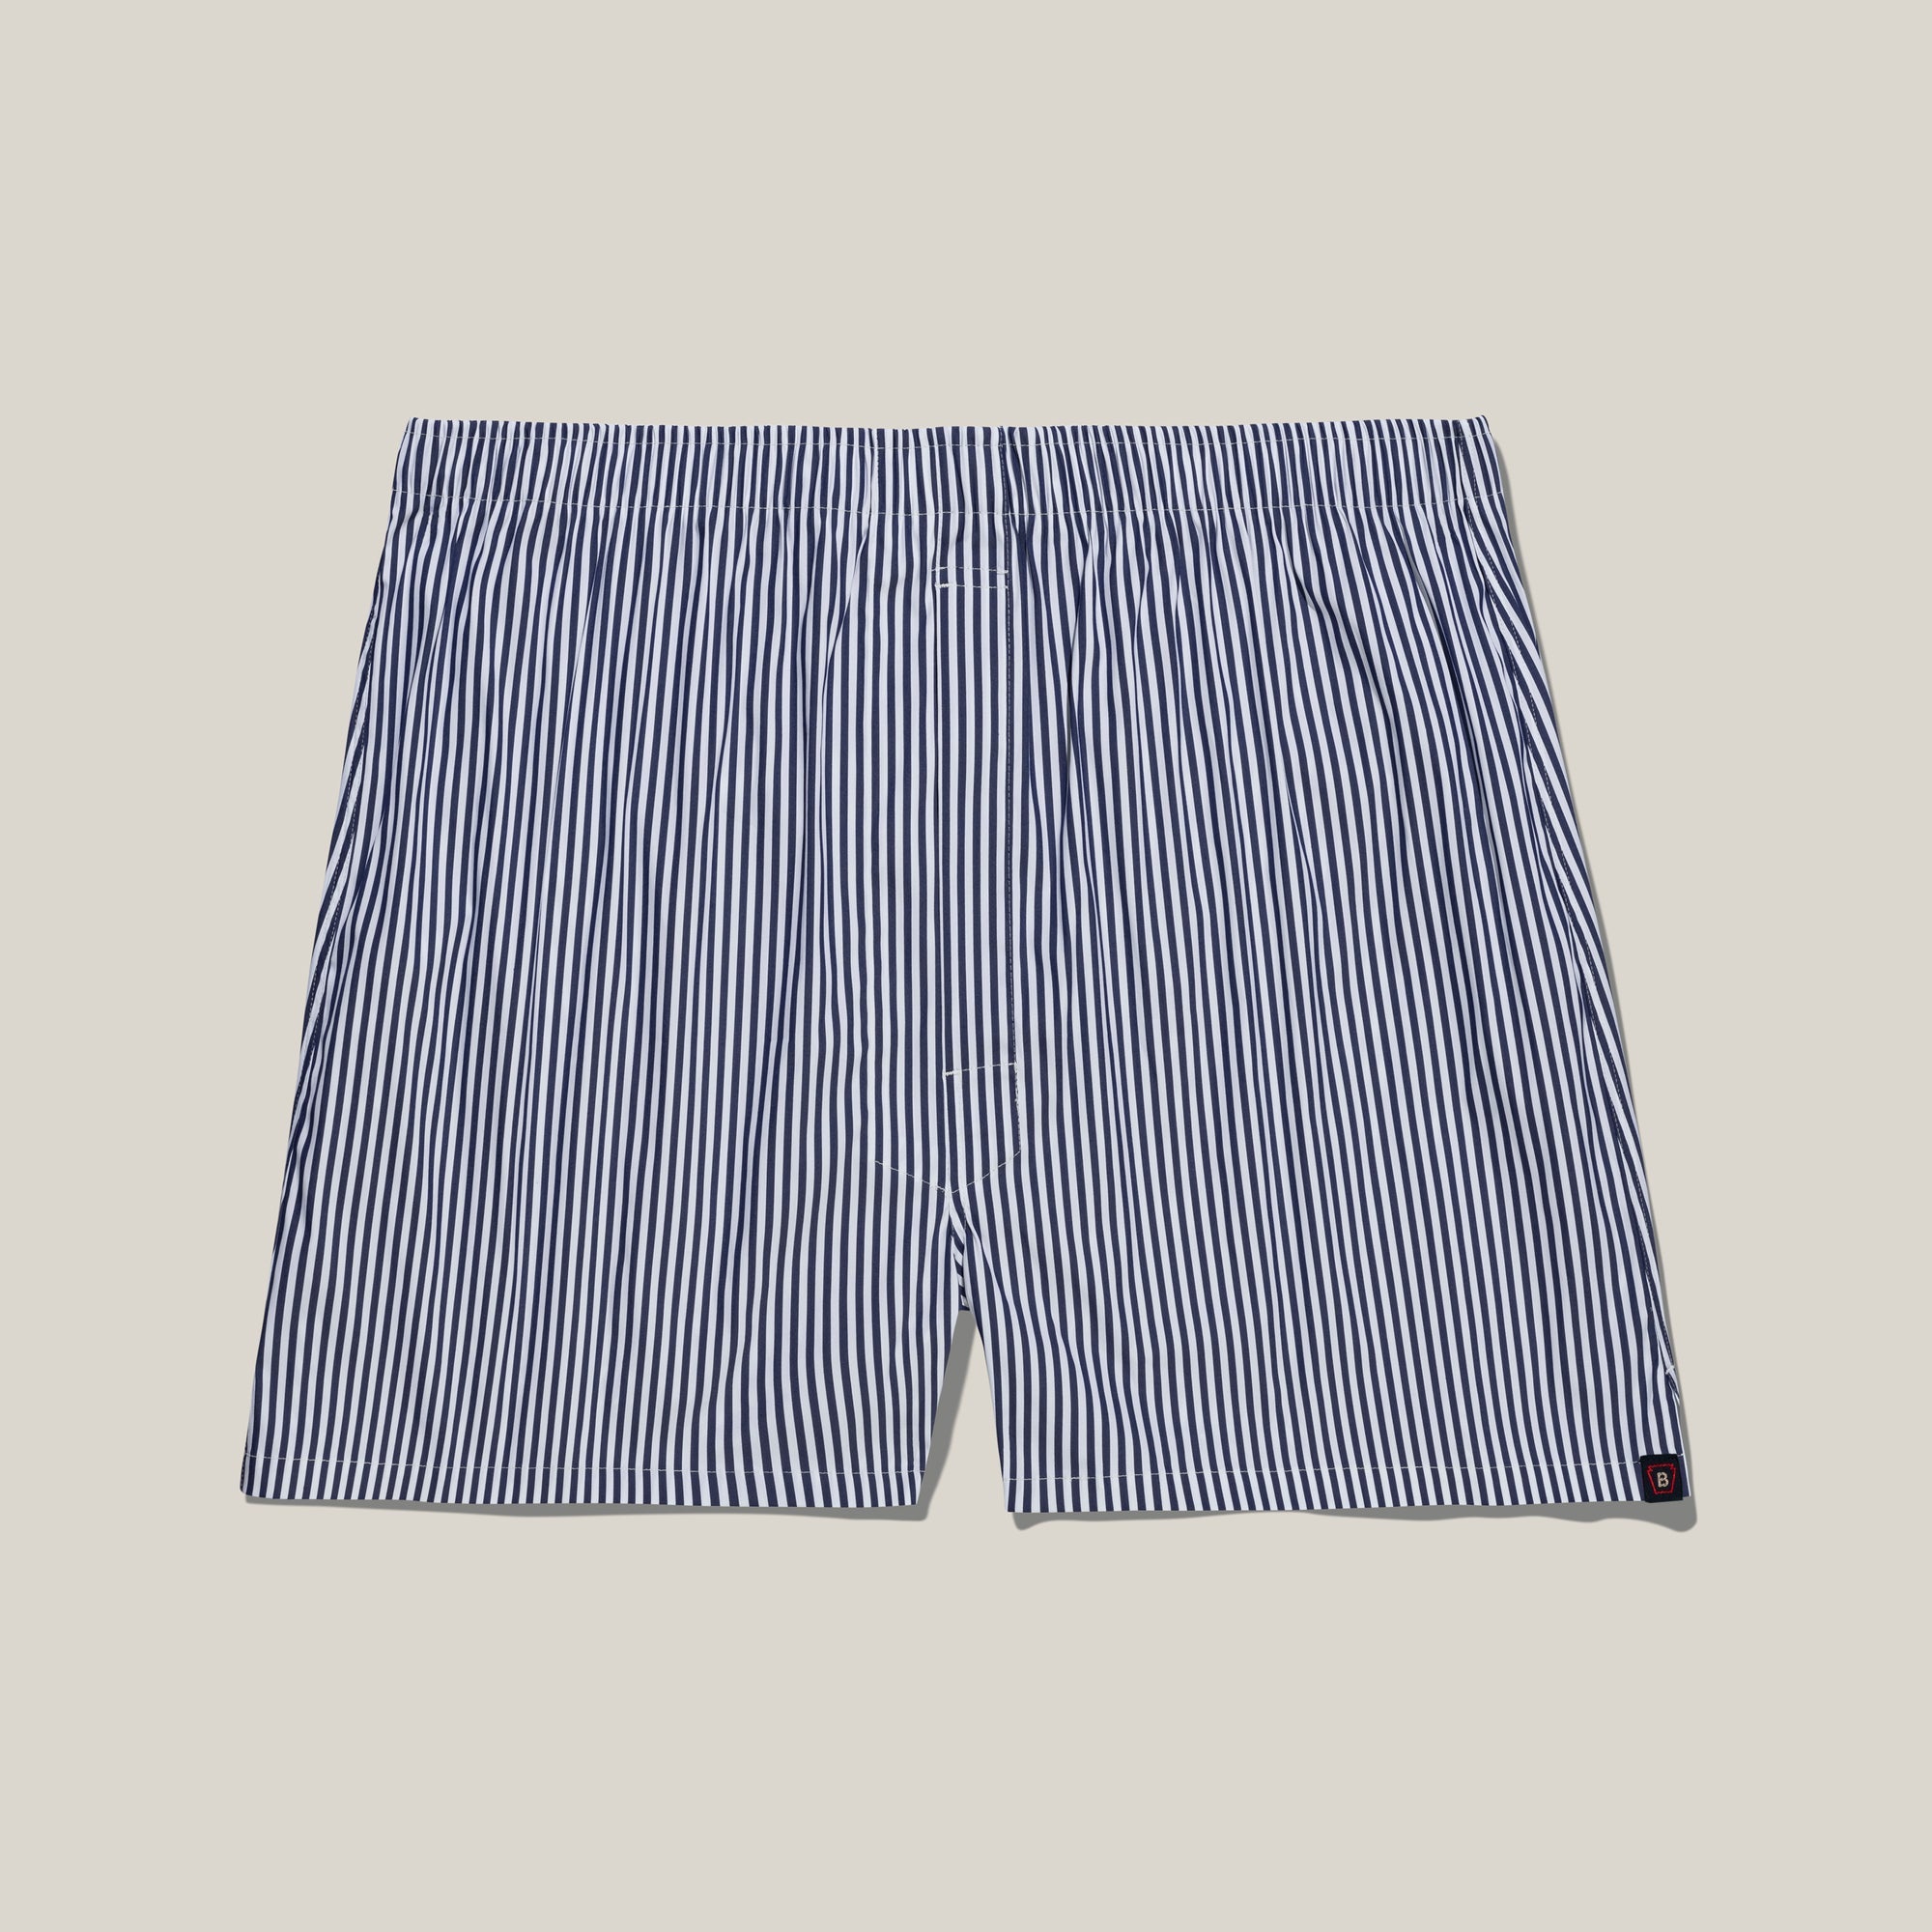 University Stripe Cotton Boxer in Navy and White (Size XX-Large) by Bills Khakis